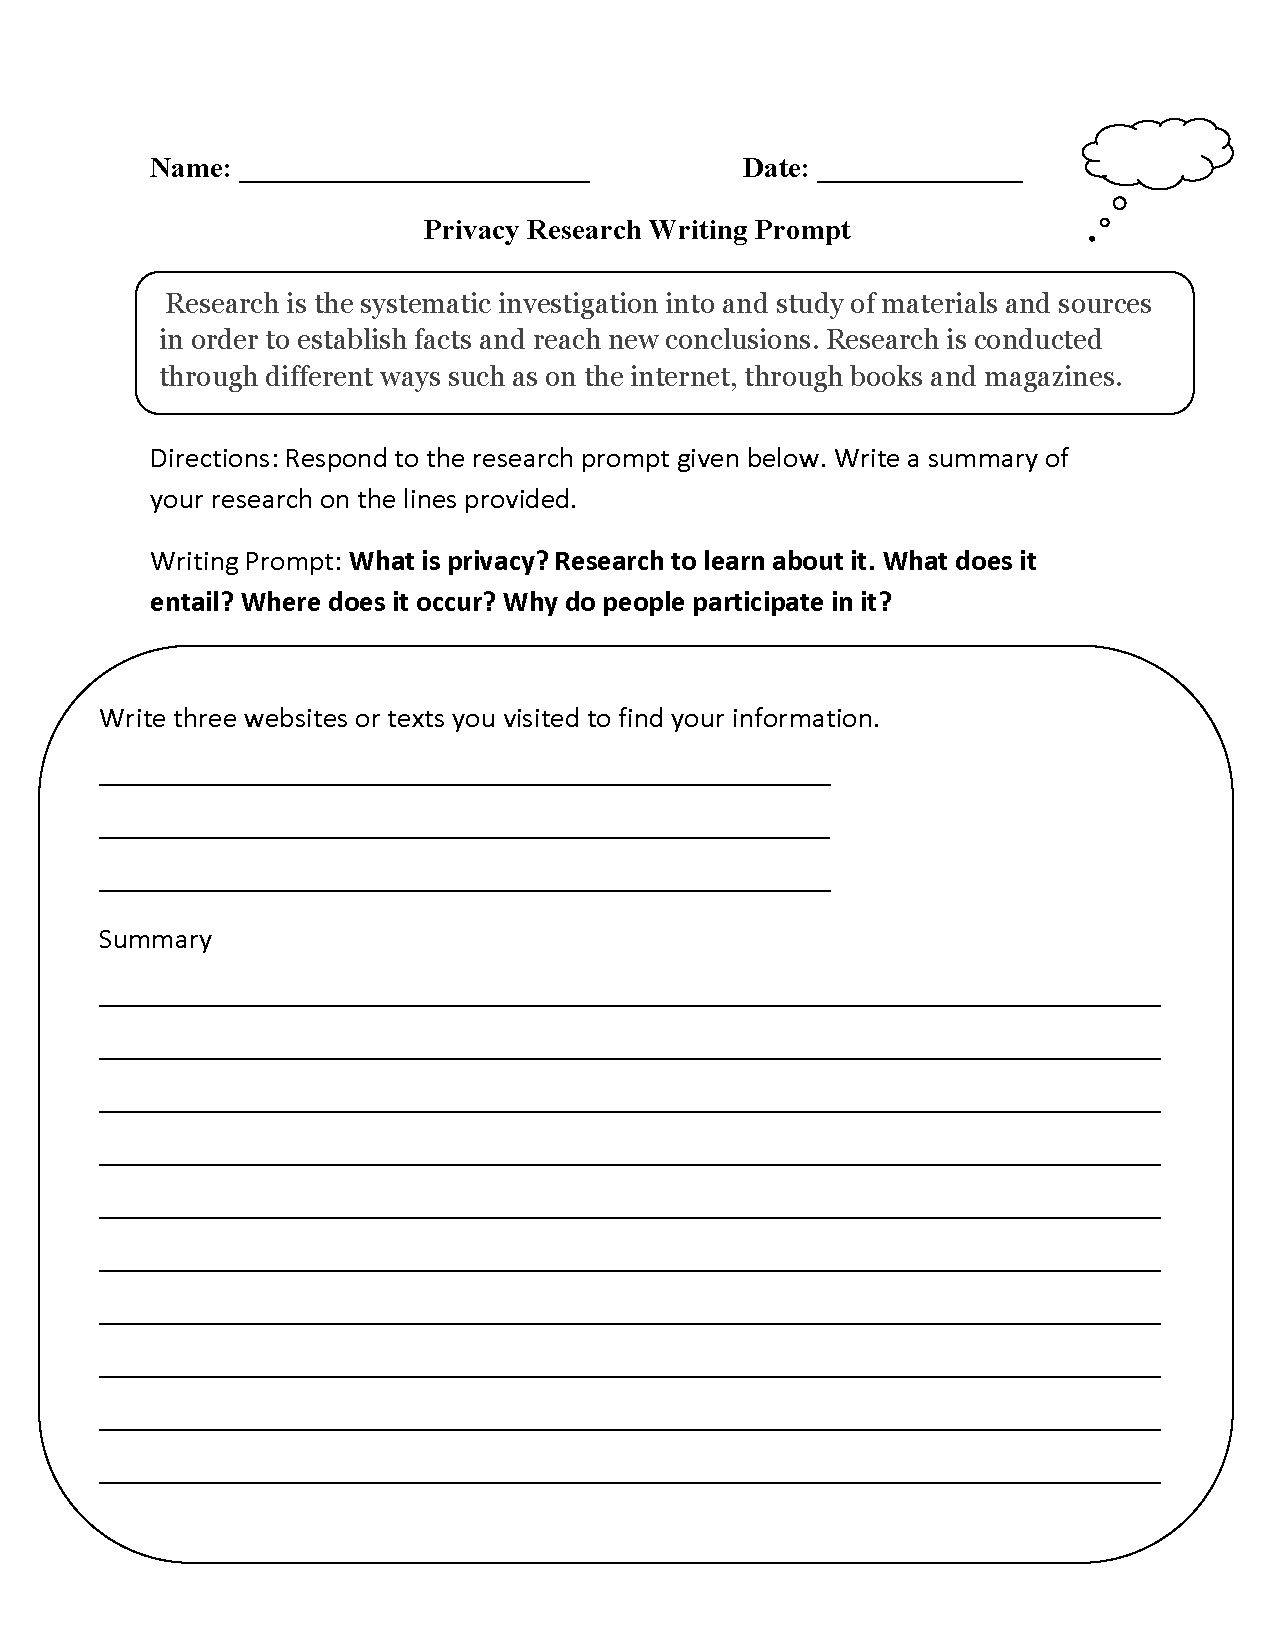 Privacy Research Writing Prompts Worksheet